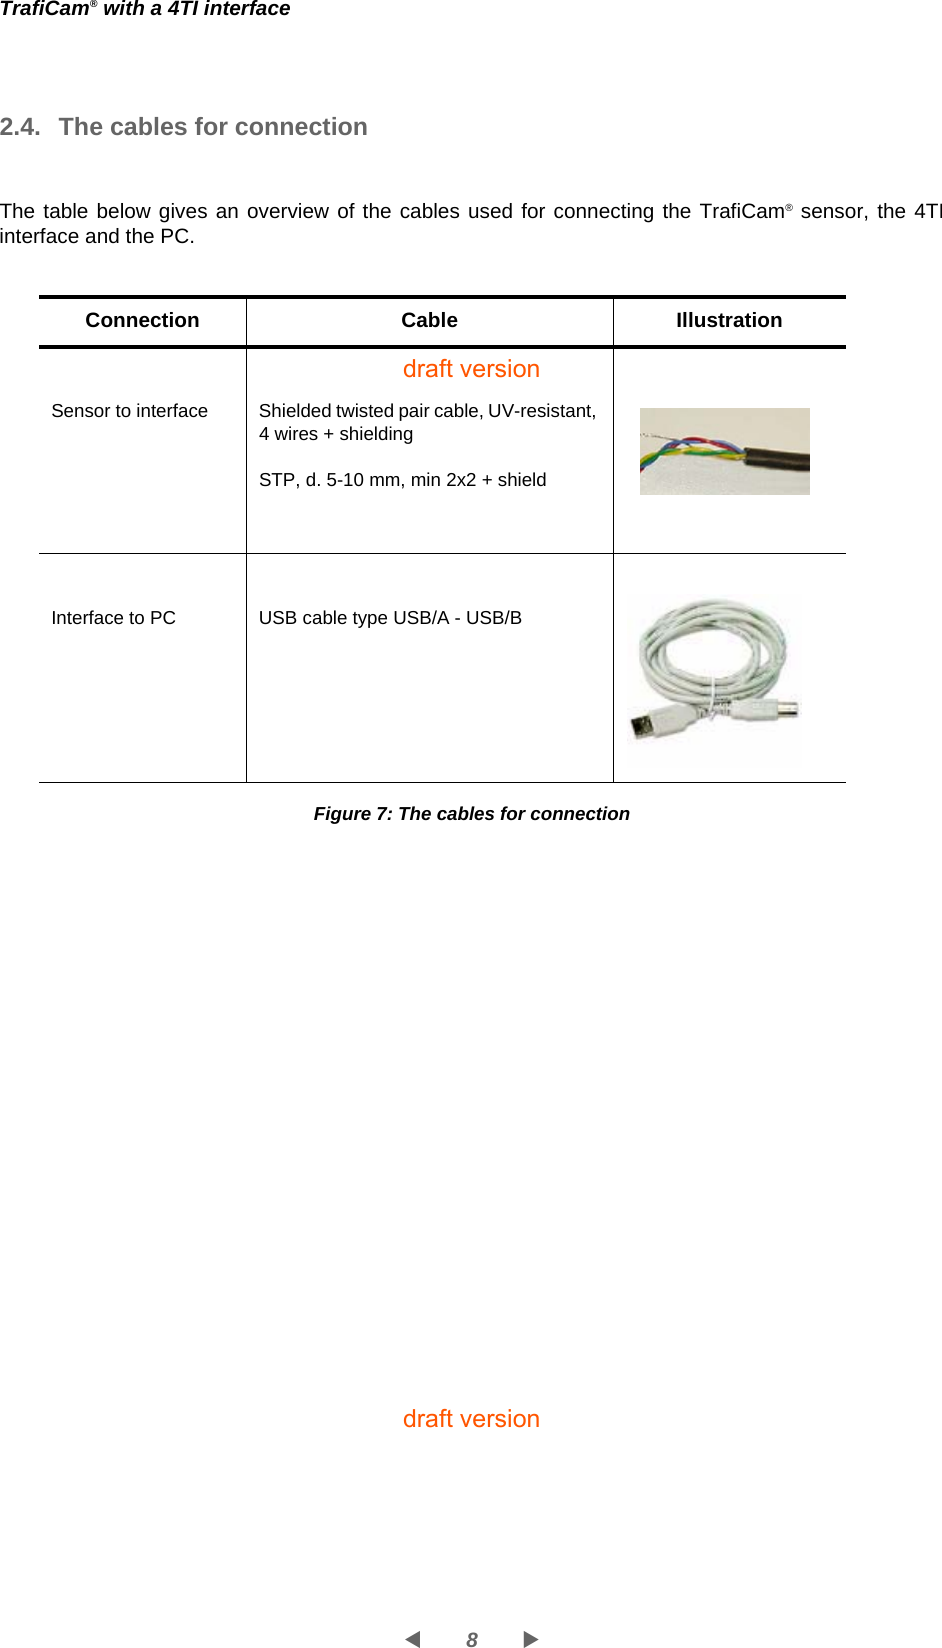 8WXTrafiCam® with a 4TI interface2.4.  The cables for connectionThe table below gives an overview of the cables used for connecting the TrafiCam® sensor, the 4TI interface and the PC.Figure 7: The cables for connectionConnection Cable IllustrationSensor to interface Shielded twisted pair cable, UV-resistant, 4 wires + shieldingSTP, d. 5-10 mm, min 2x2 + shieldInterface to PC USB cable type USB/A - USB/Bdraft versiondraft version